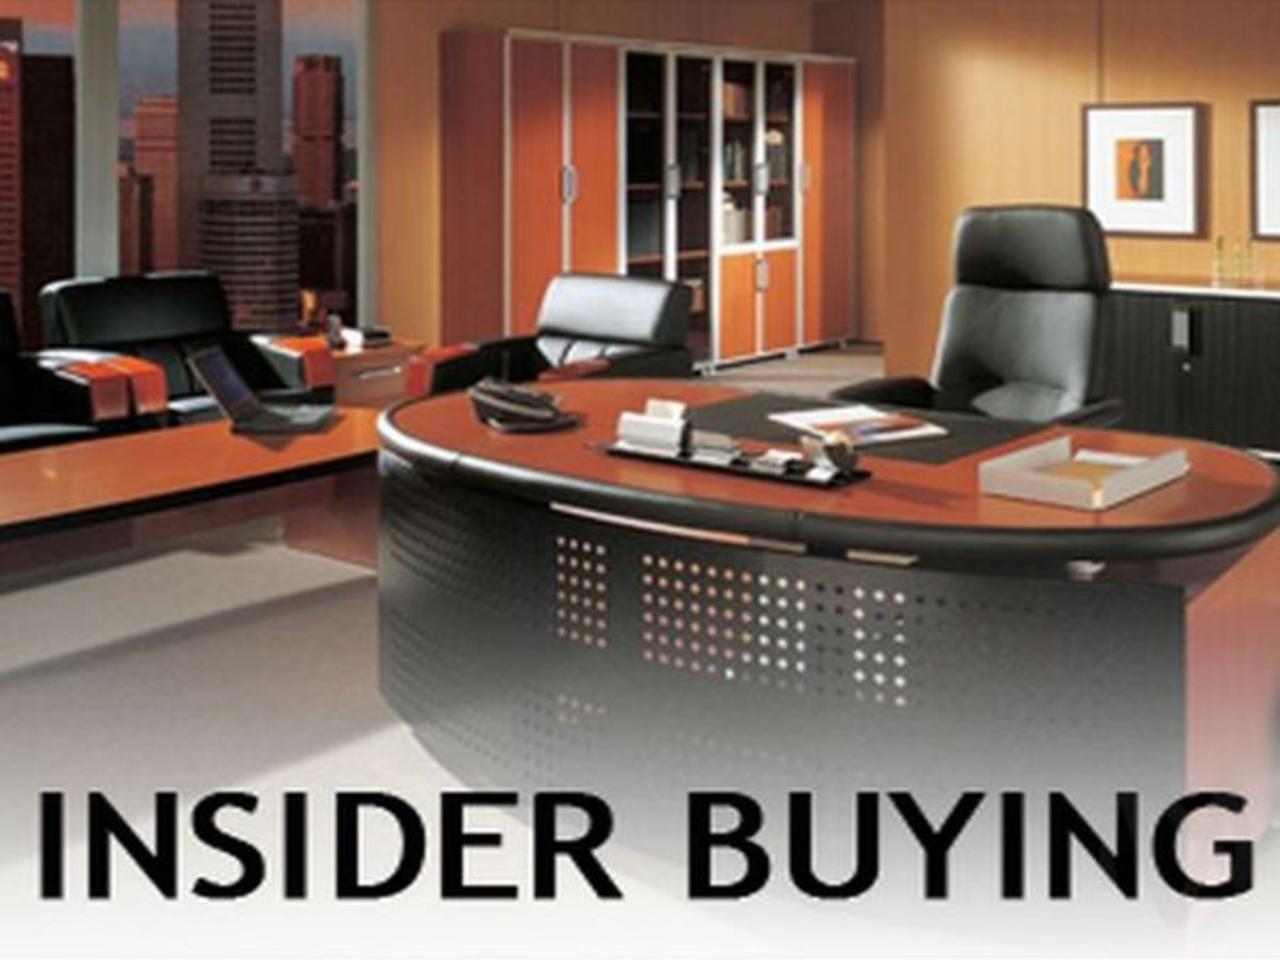 Thursday 11/18 Insider Buying Report: THRY, UP